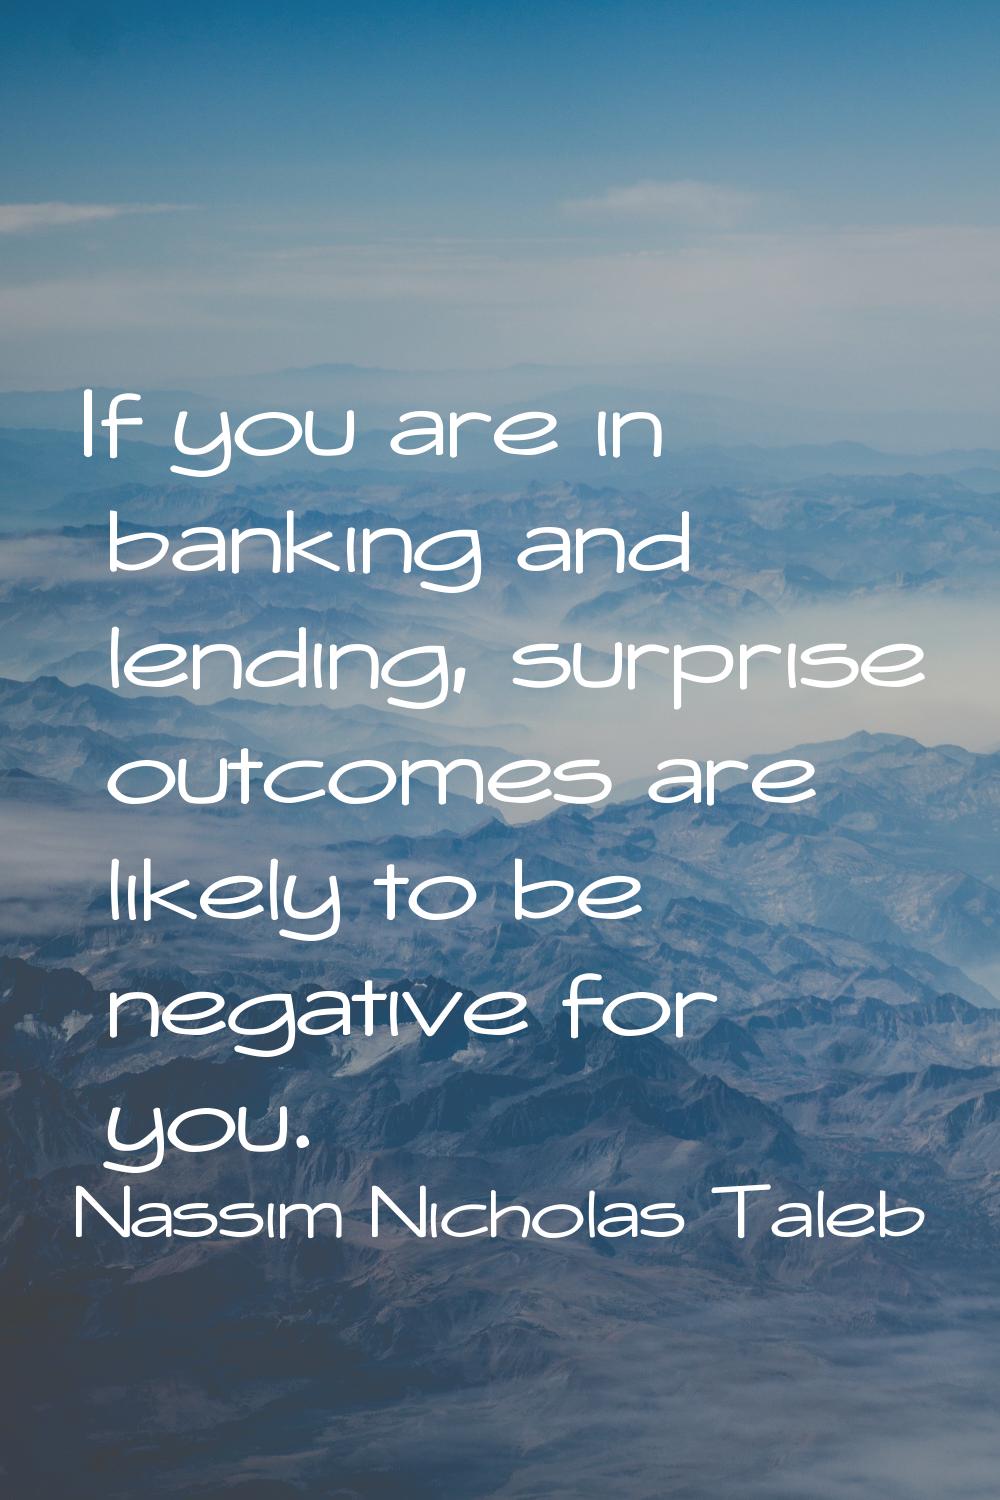 If you are in banking and lending, surprise outcomes are likely to be negative for you.